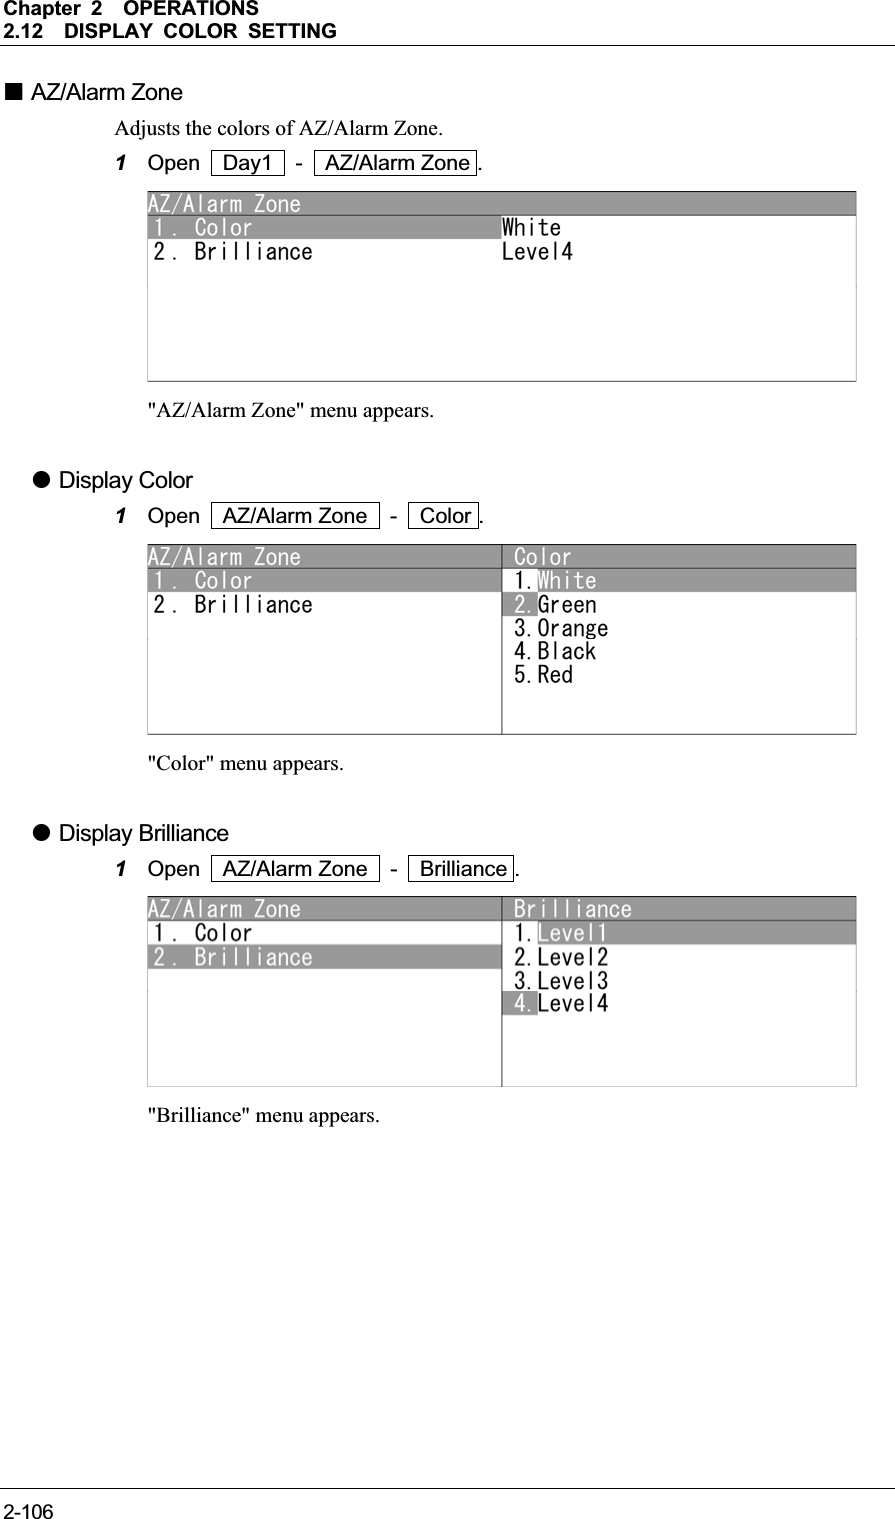 Chapter 2OPERATIONS2.12DISPLAY COLOR SETTING 2-106 AZ/Alarm Zone Adjusts the colors of AZ/Alarm Zone. 1Open  Day1  -  AZ/Alarm Zone . &quot;AZ/Alarm Zone&quot; menu appears. z Display Color 1Open  AZ/Alarm Zone  -  Color . &quot;Color&quot; menu appears. z Display Brilliance 1Open  AZ/Alarm Zone  -  Brilliance . &quot;Brilliance&quot; menu appears. 